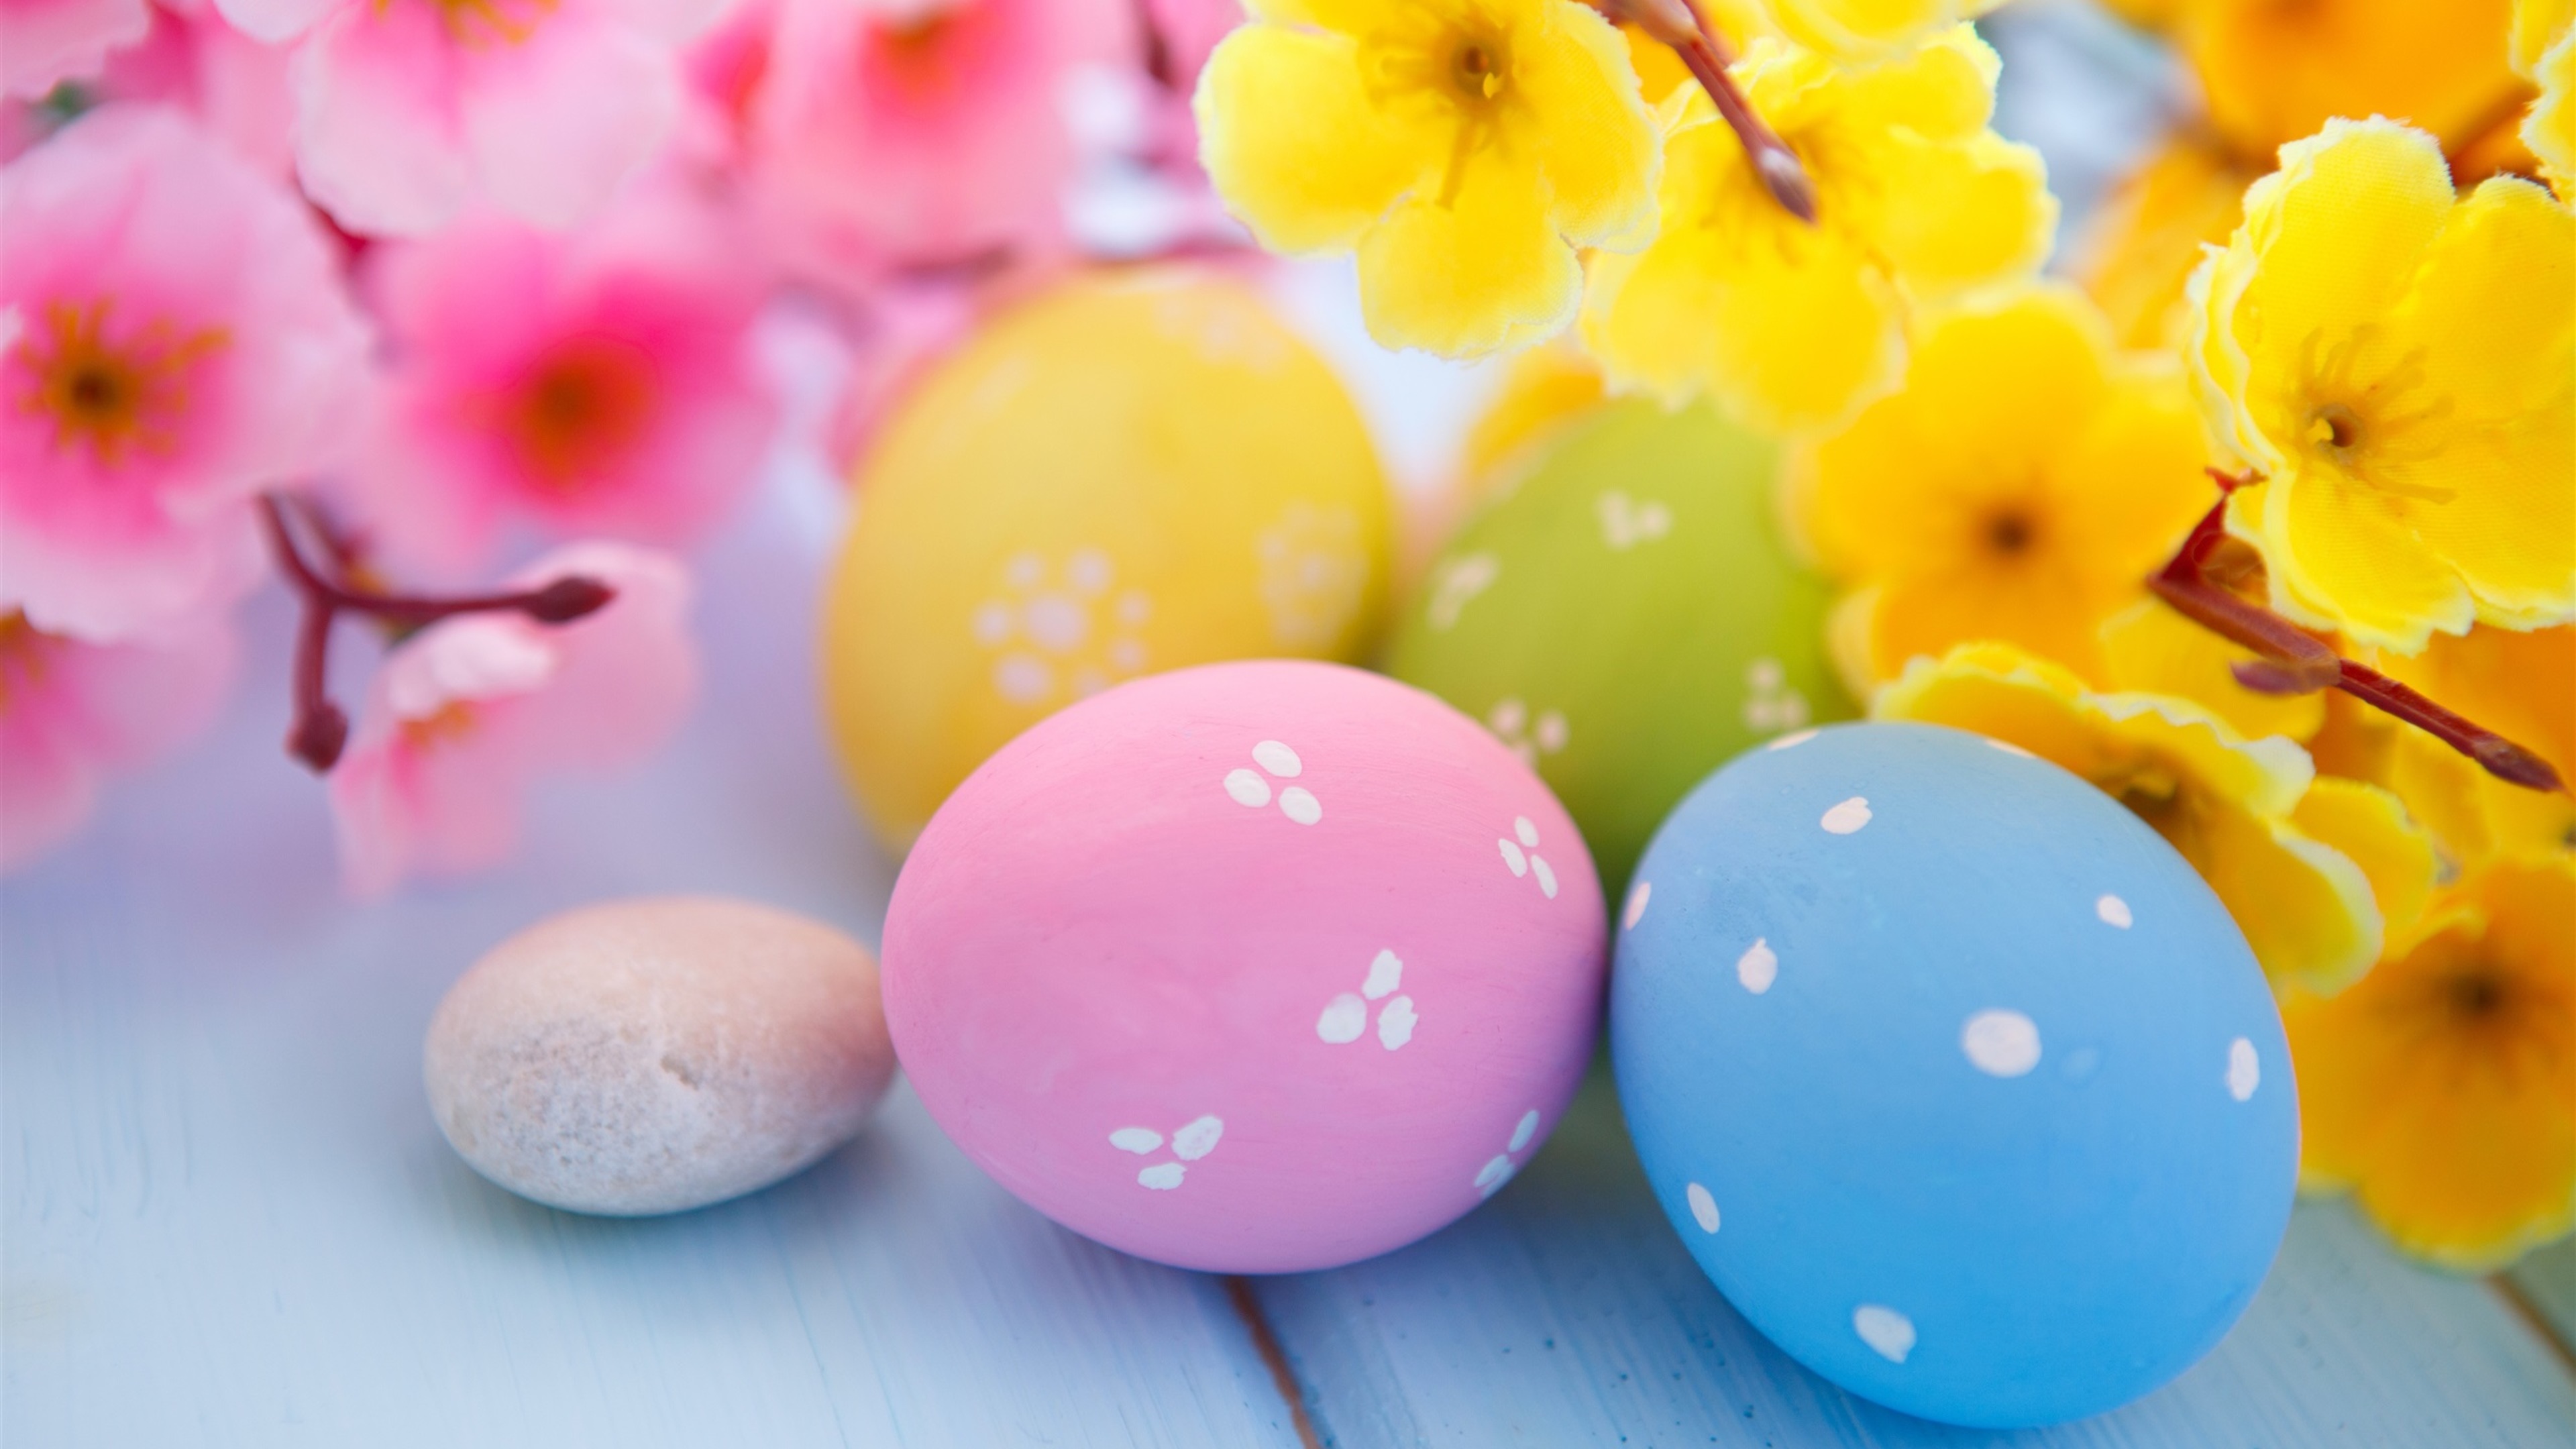 Easter Eggs and Spring Blossoms 4k HD 4k Wallpaper, Image, Background, Photo and Picture